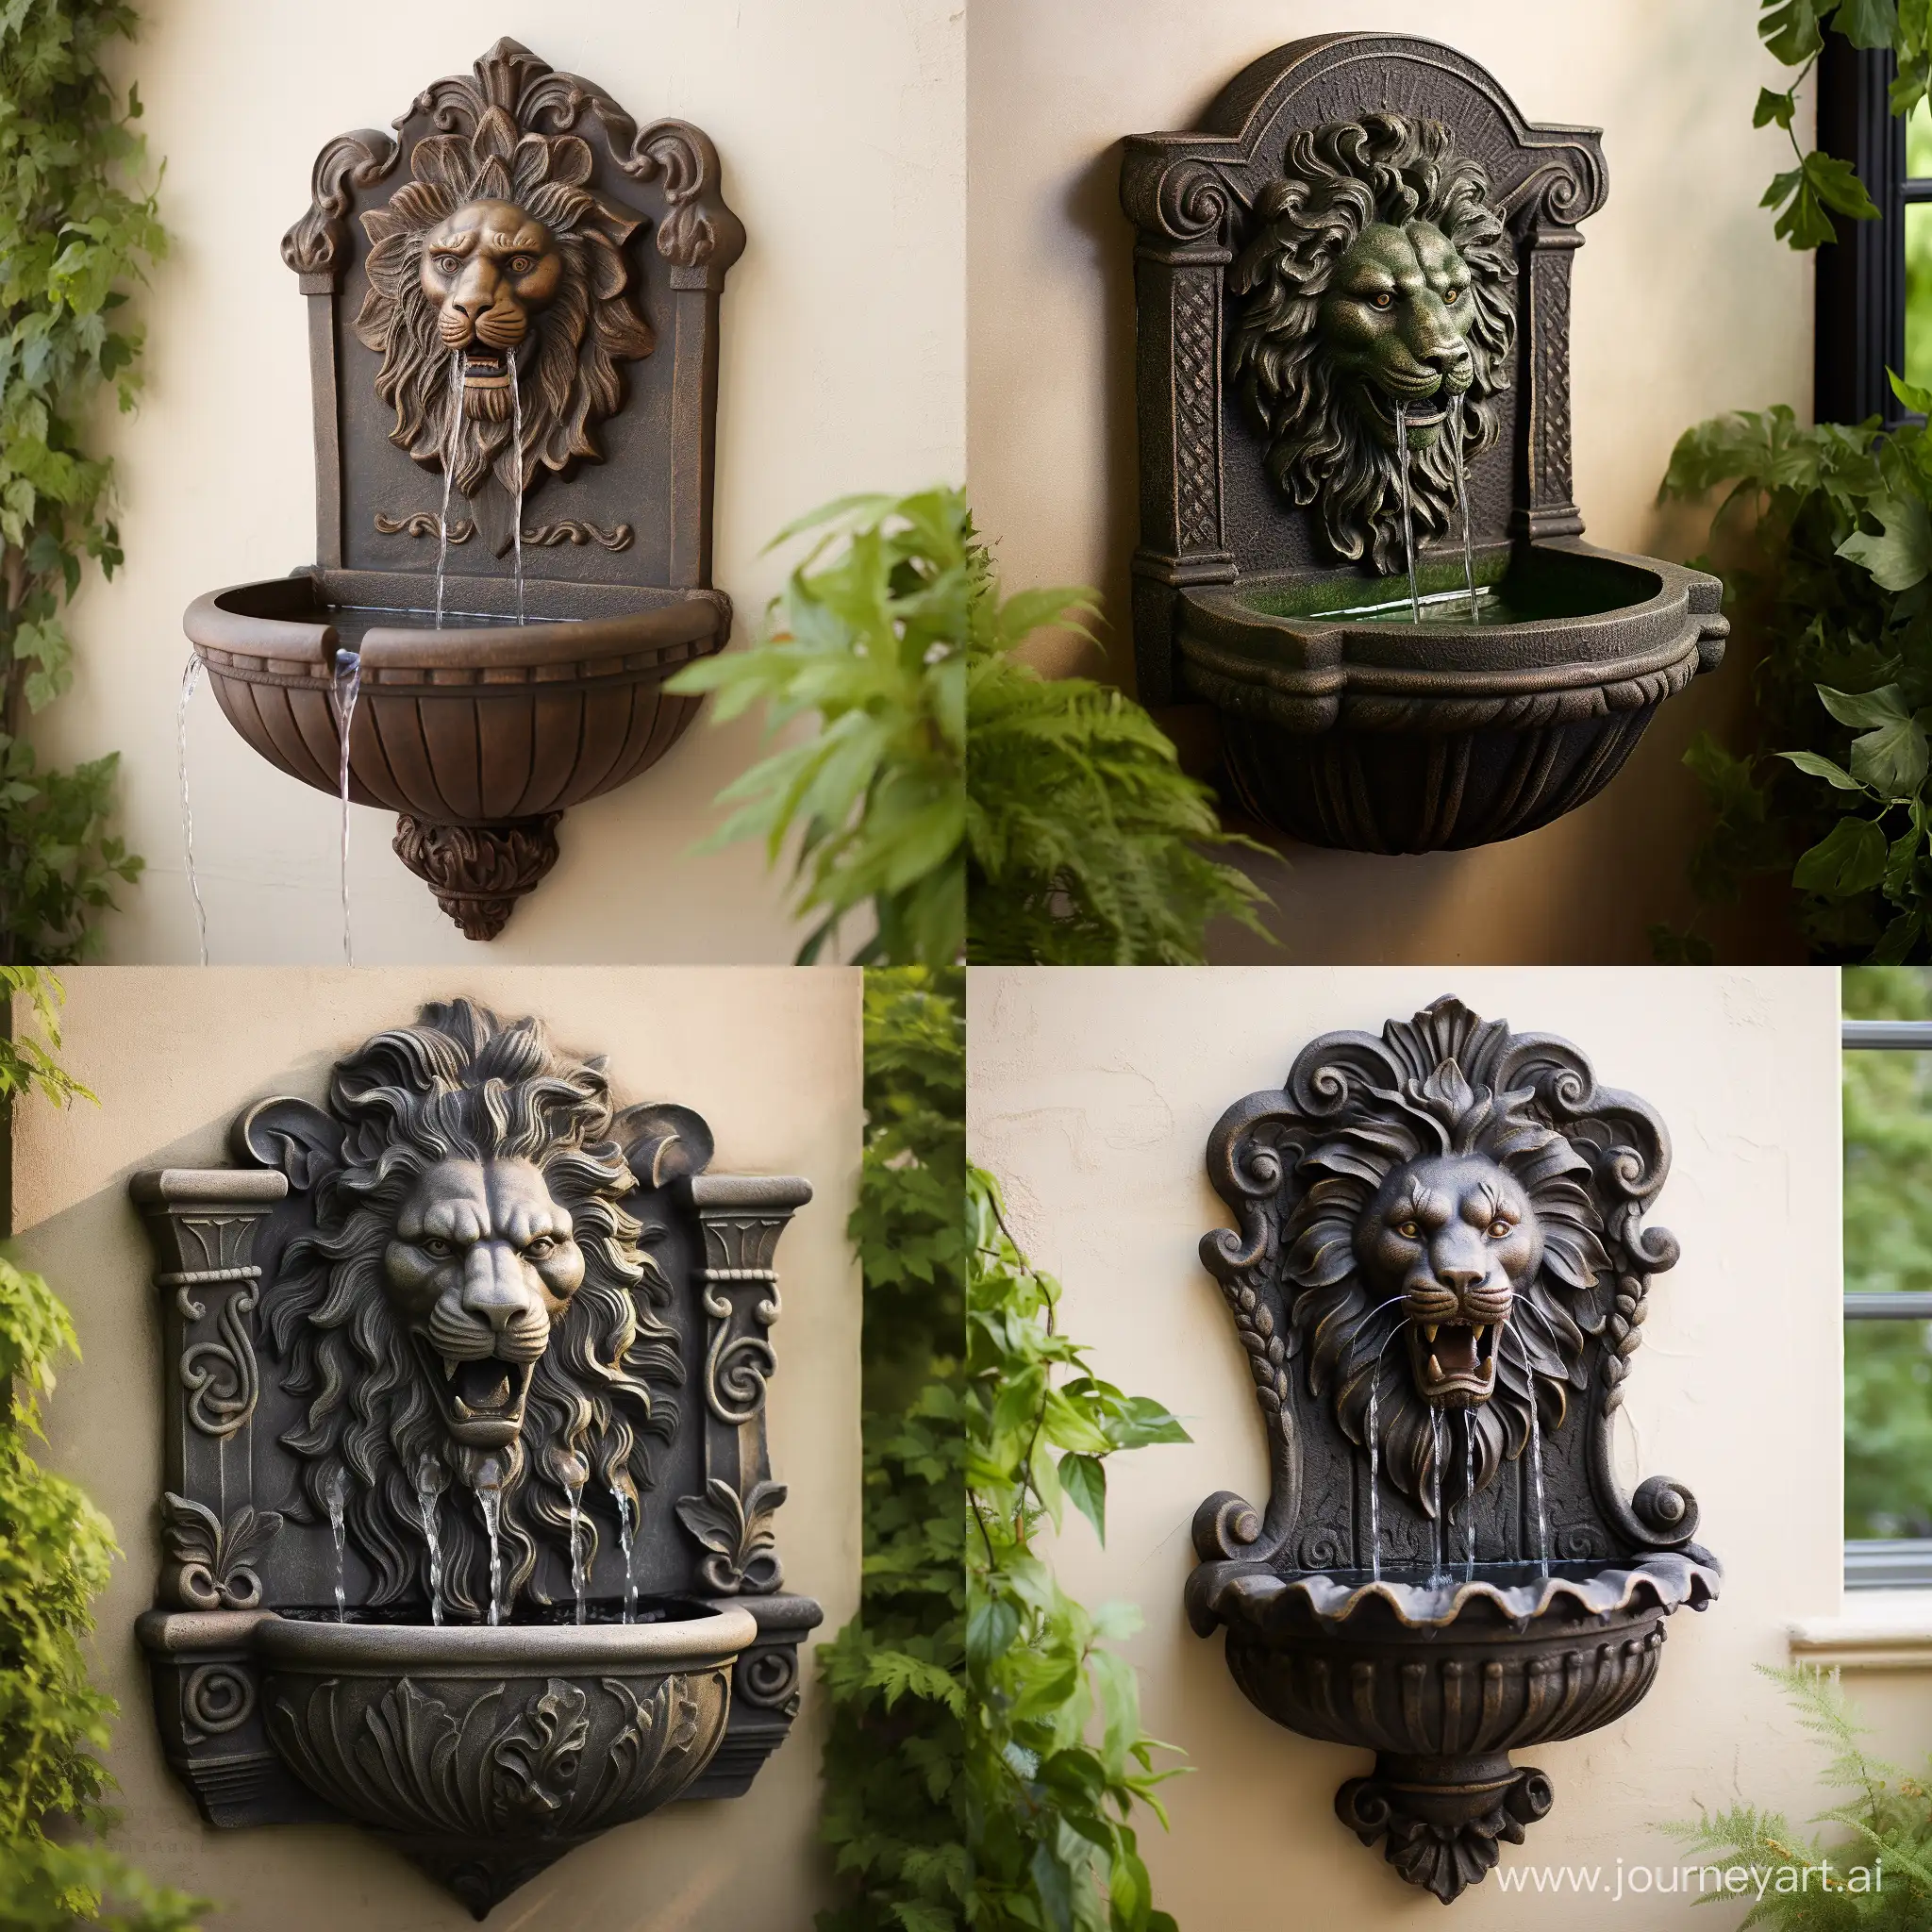 Majestic-LionThemed-Wall-Fountain-Sculpture